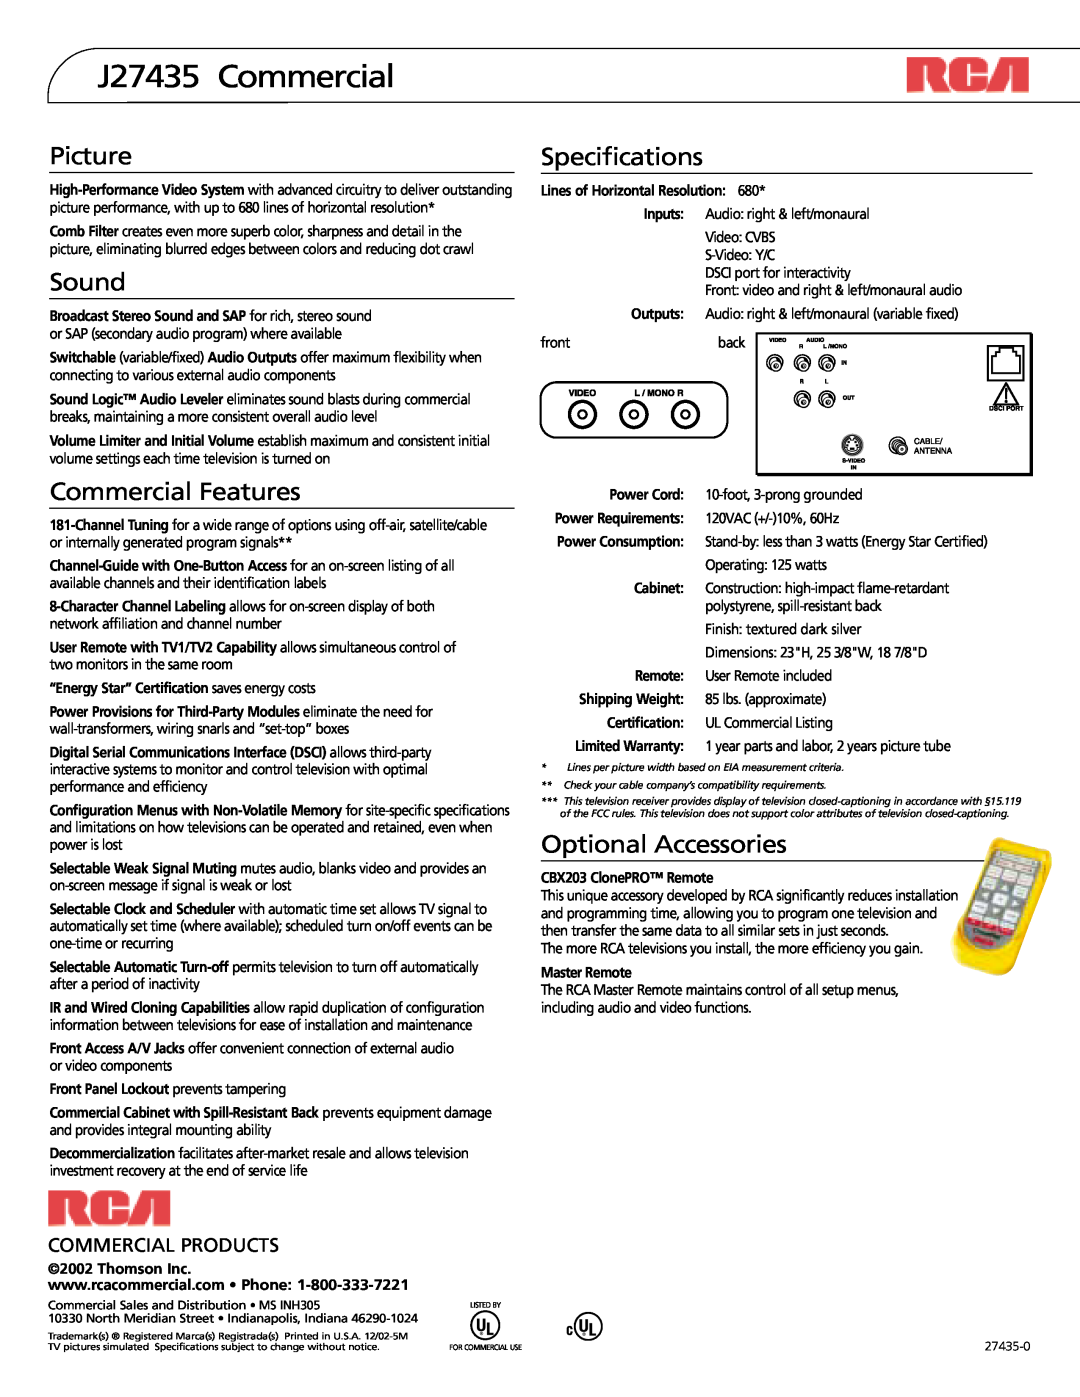 RCA J27435 Commercial, Picture, Sound, Commercial Features, Specifications, Optional Accessories, Commercial Products 